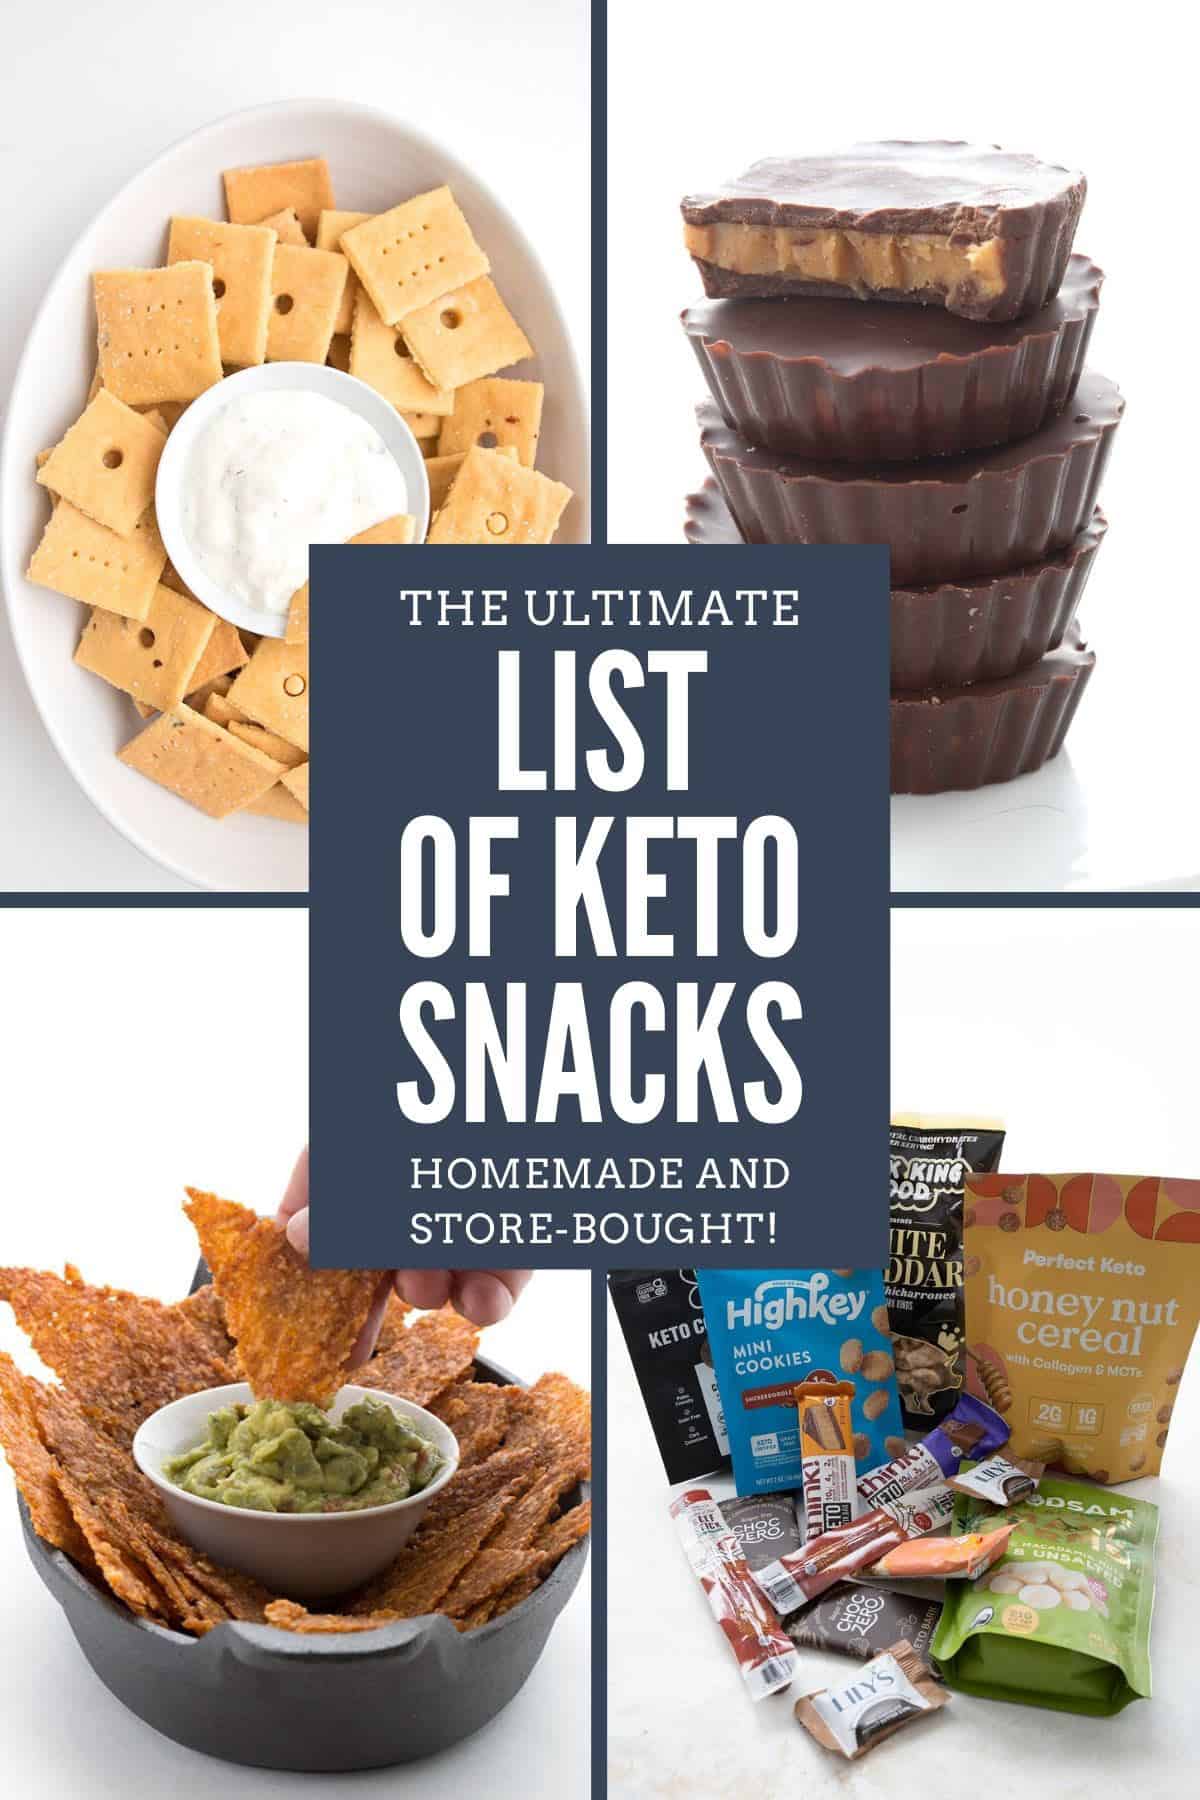 The Best Keto Snacks - over 60 recipes and ideas!